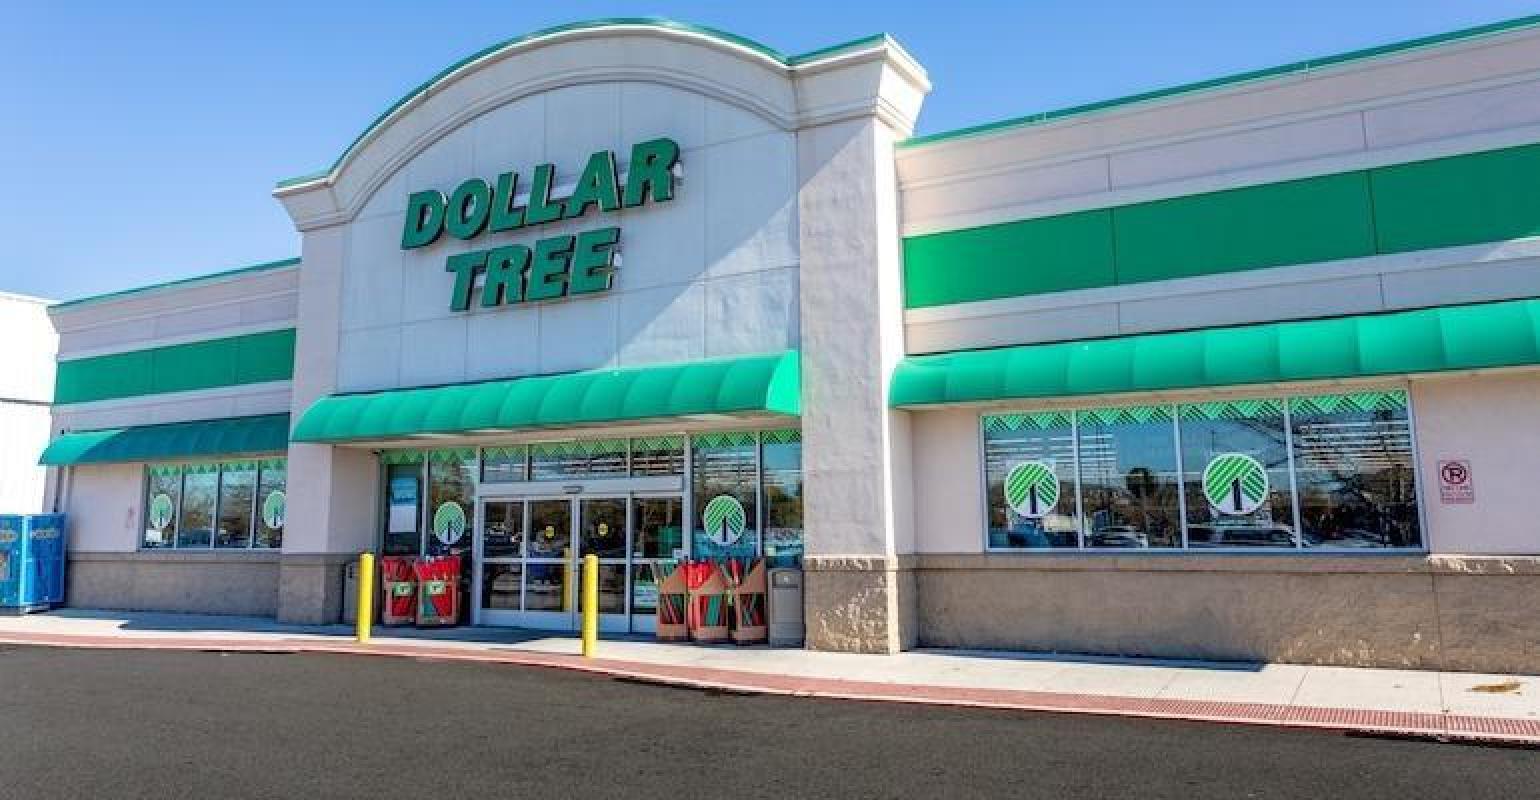 Dollar Tree will start offering items that cost $5